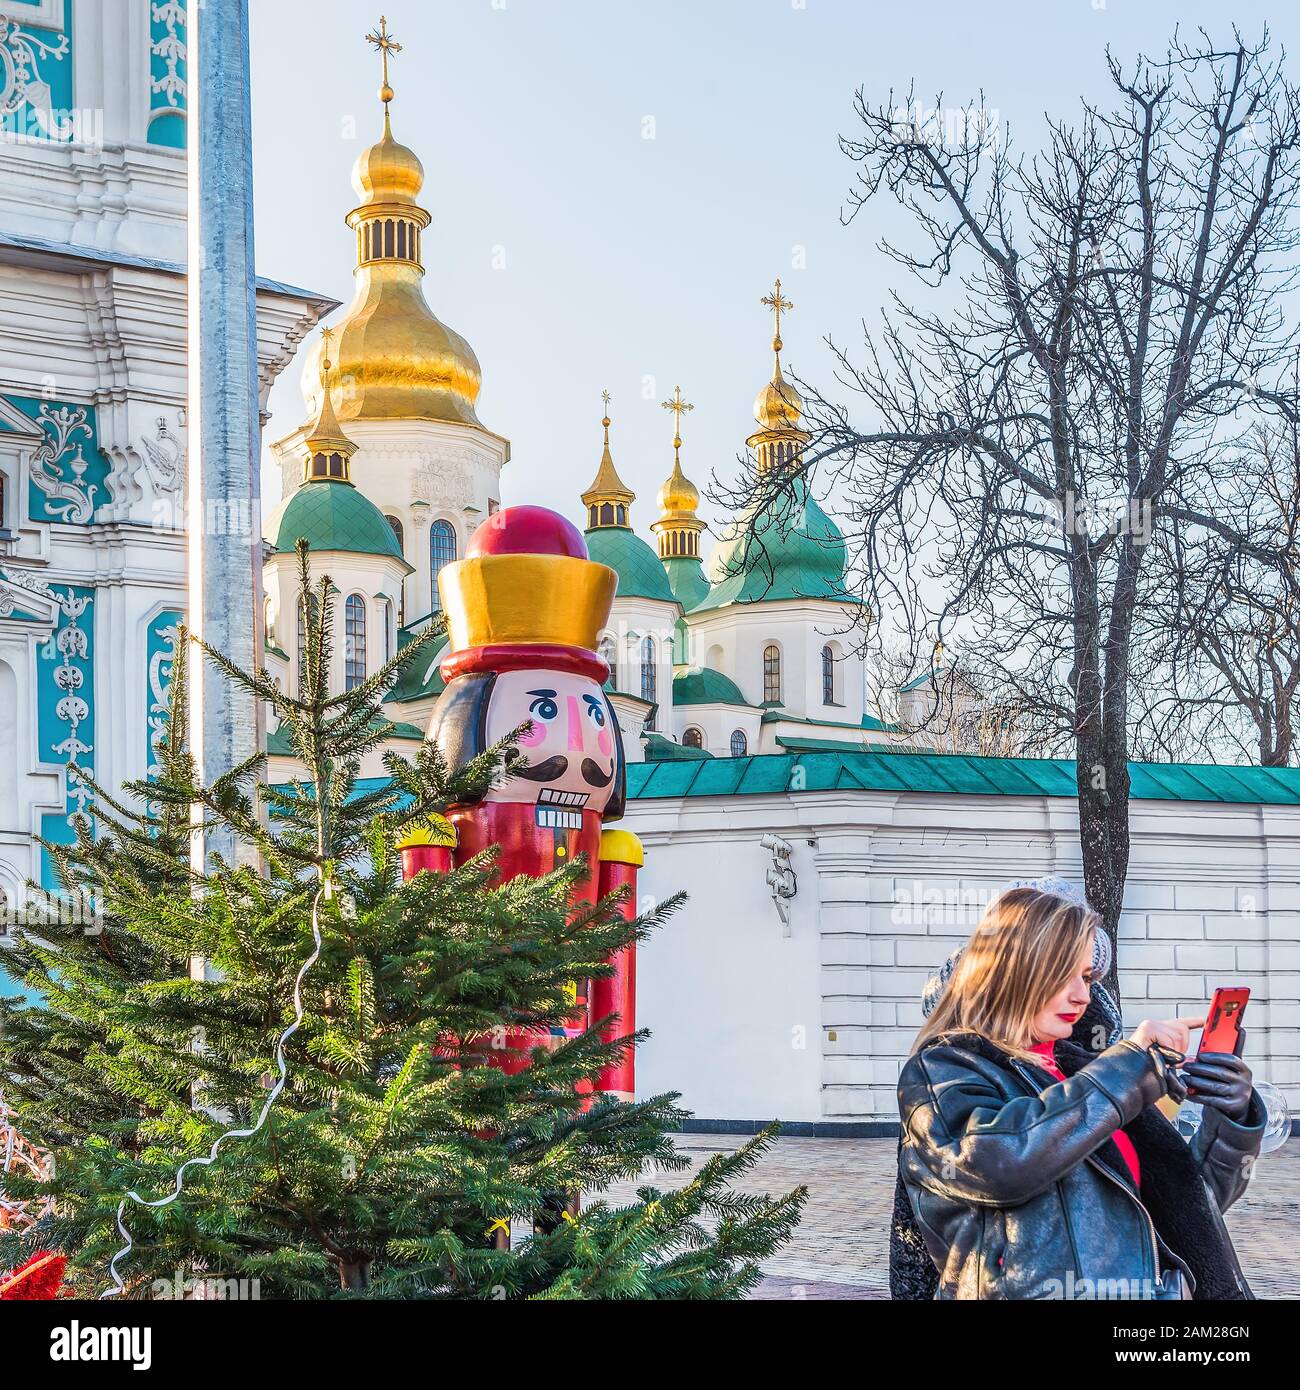 Kiev, Ukraine - January 3, 2020: Christmas tree is installed on Sophia Square. The magical world of adventures of the famous Nutcracker story gives gu Stock Photo